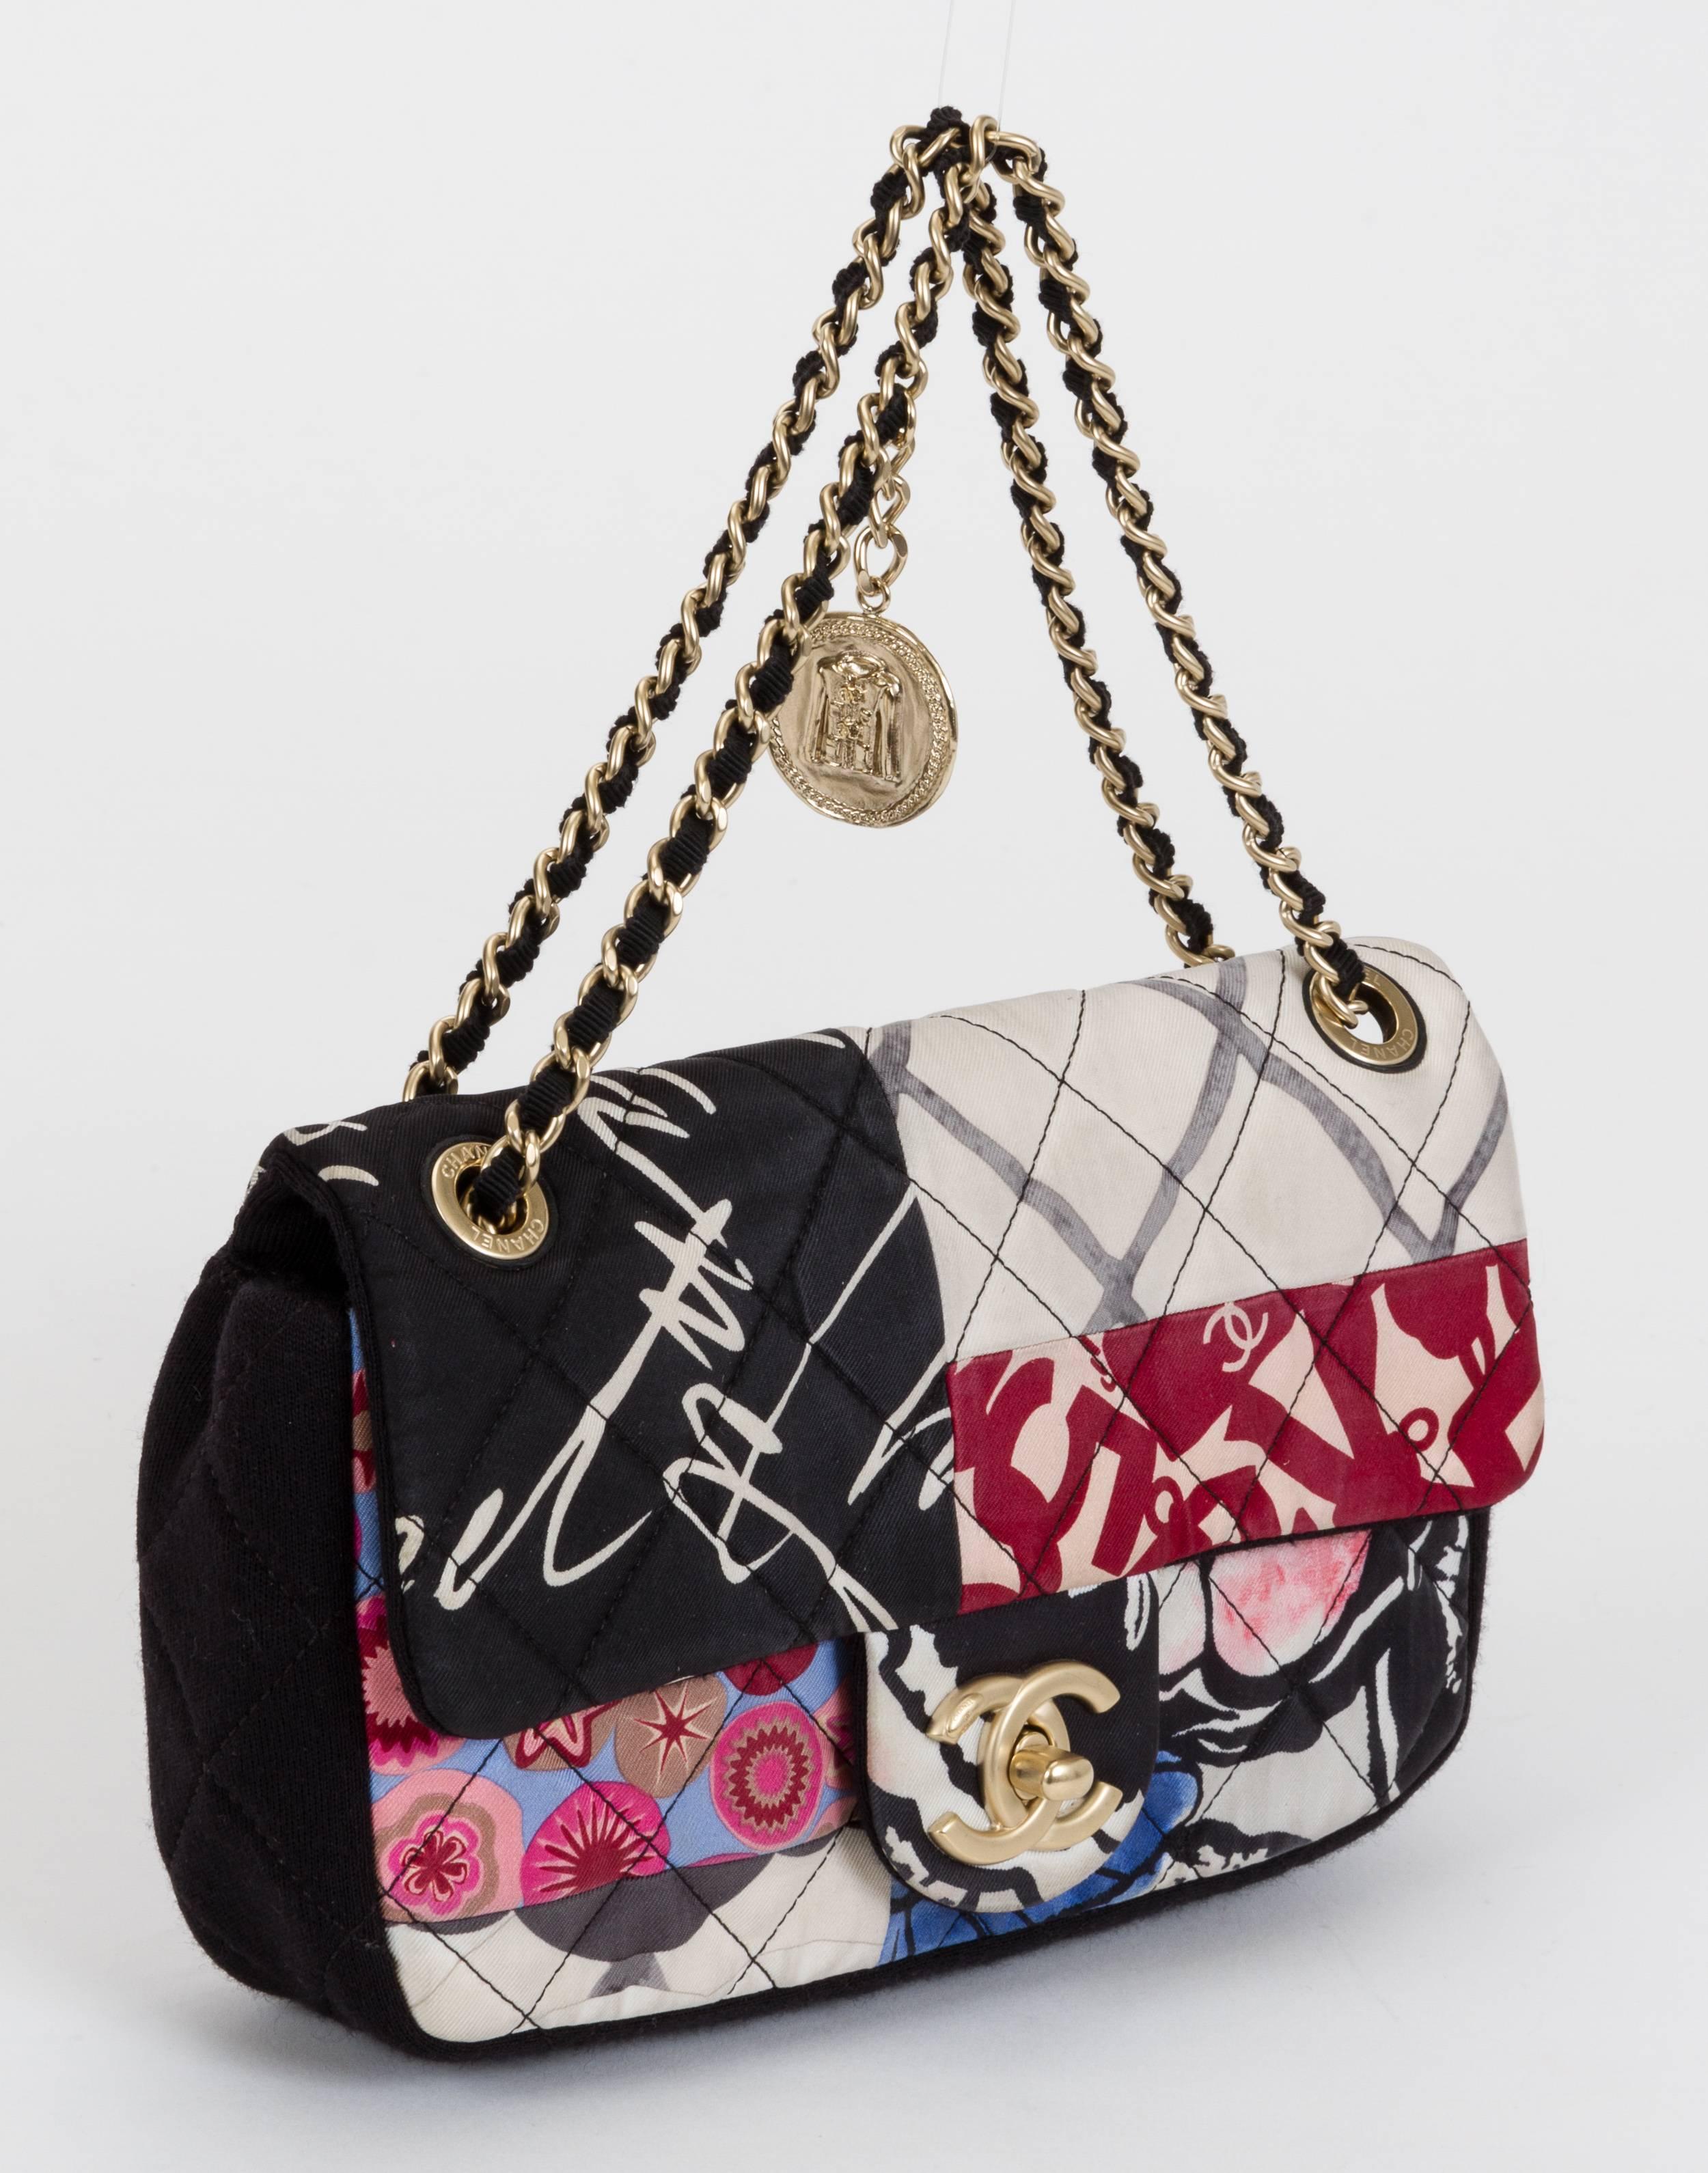 Chanel single-flap cross-body bag in black jersey and multicolored patchwork fabric with coin charm. Drop, 12"L/22"L. Comes with hologram, card, and dust cover. Minor wear.
